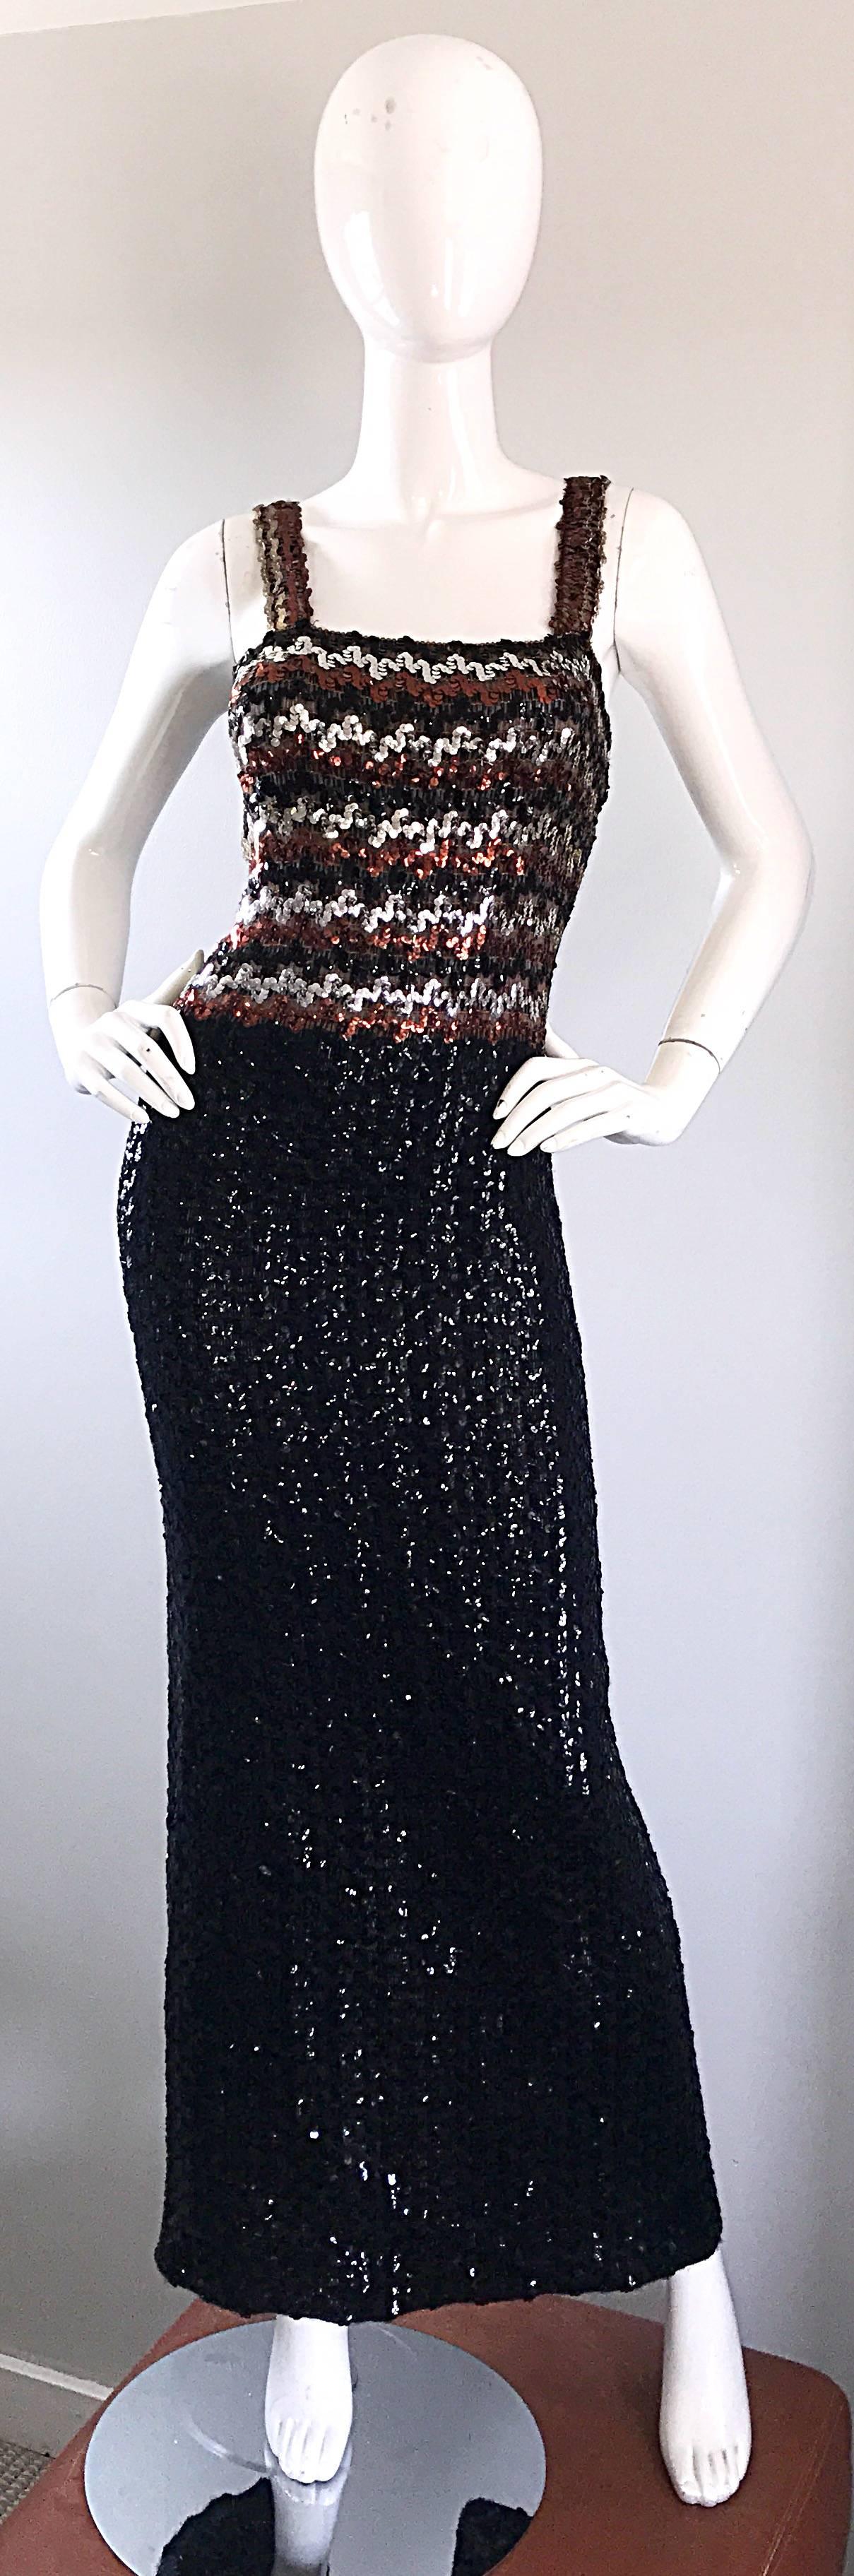 Sexy 1970s fully sequined sleeveless full length knit dress! Features thousands of hand sewn black, brown and silver sequins throughout. Flattering zig-zag pattern on the front and back of the bodice. Slit up the back center reveals just the right